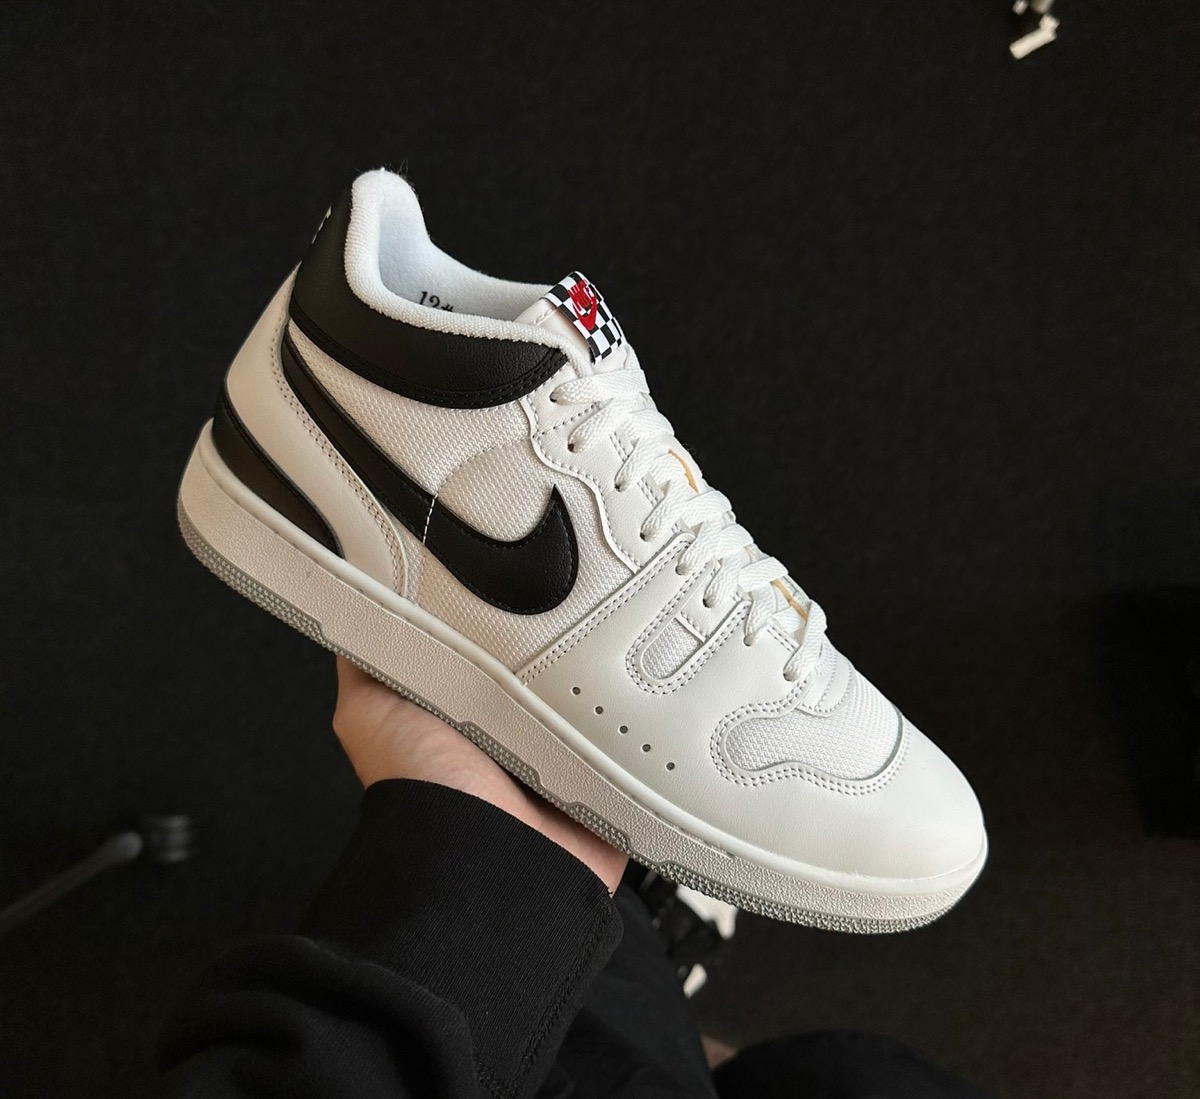 Nike Attack QS SP “Black and White”が国内9月7日に復刻発売予定